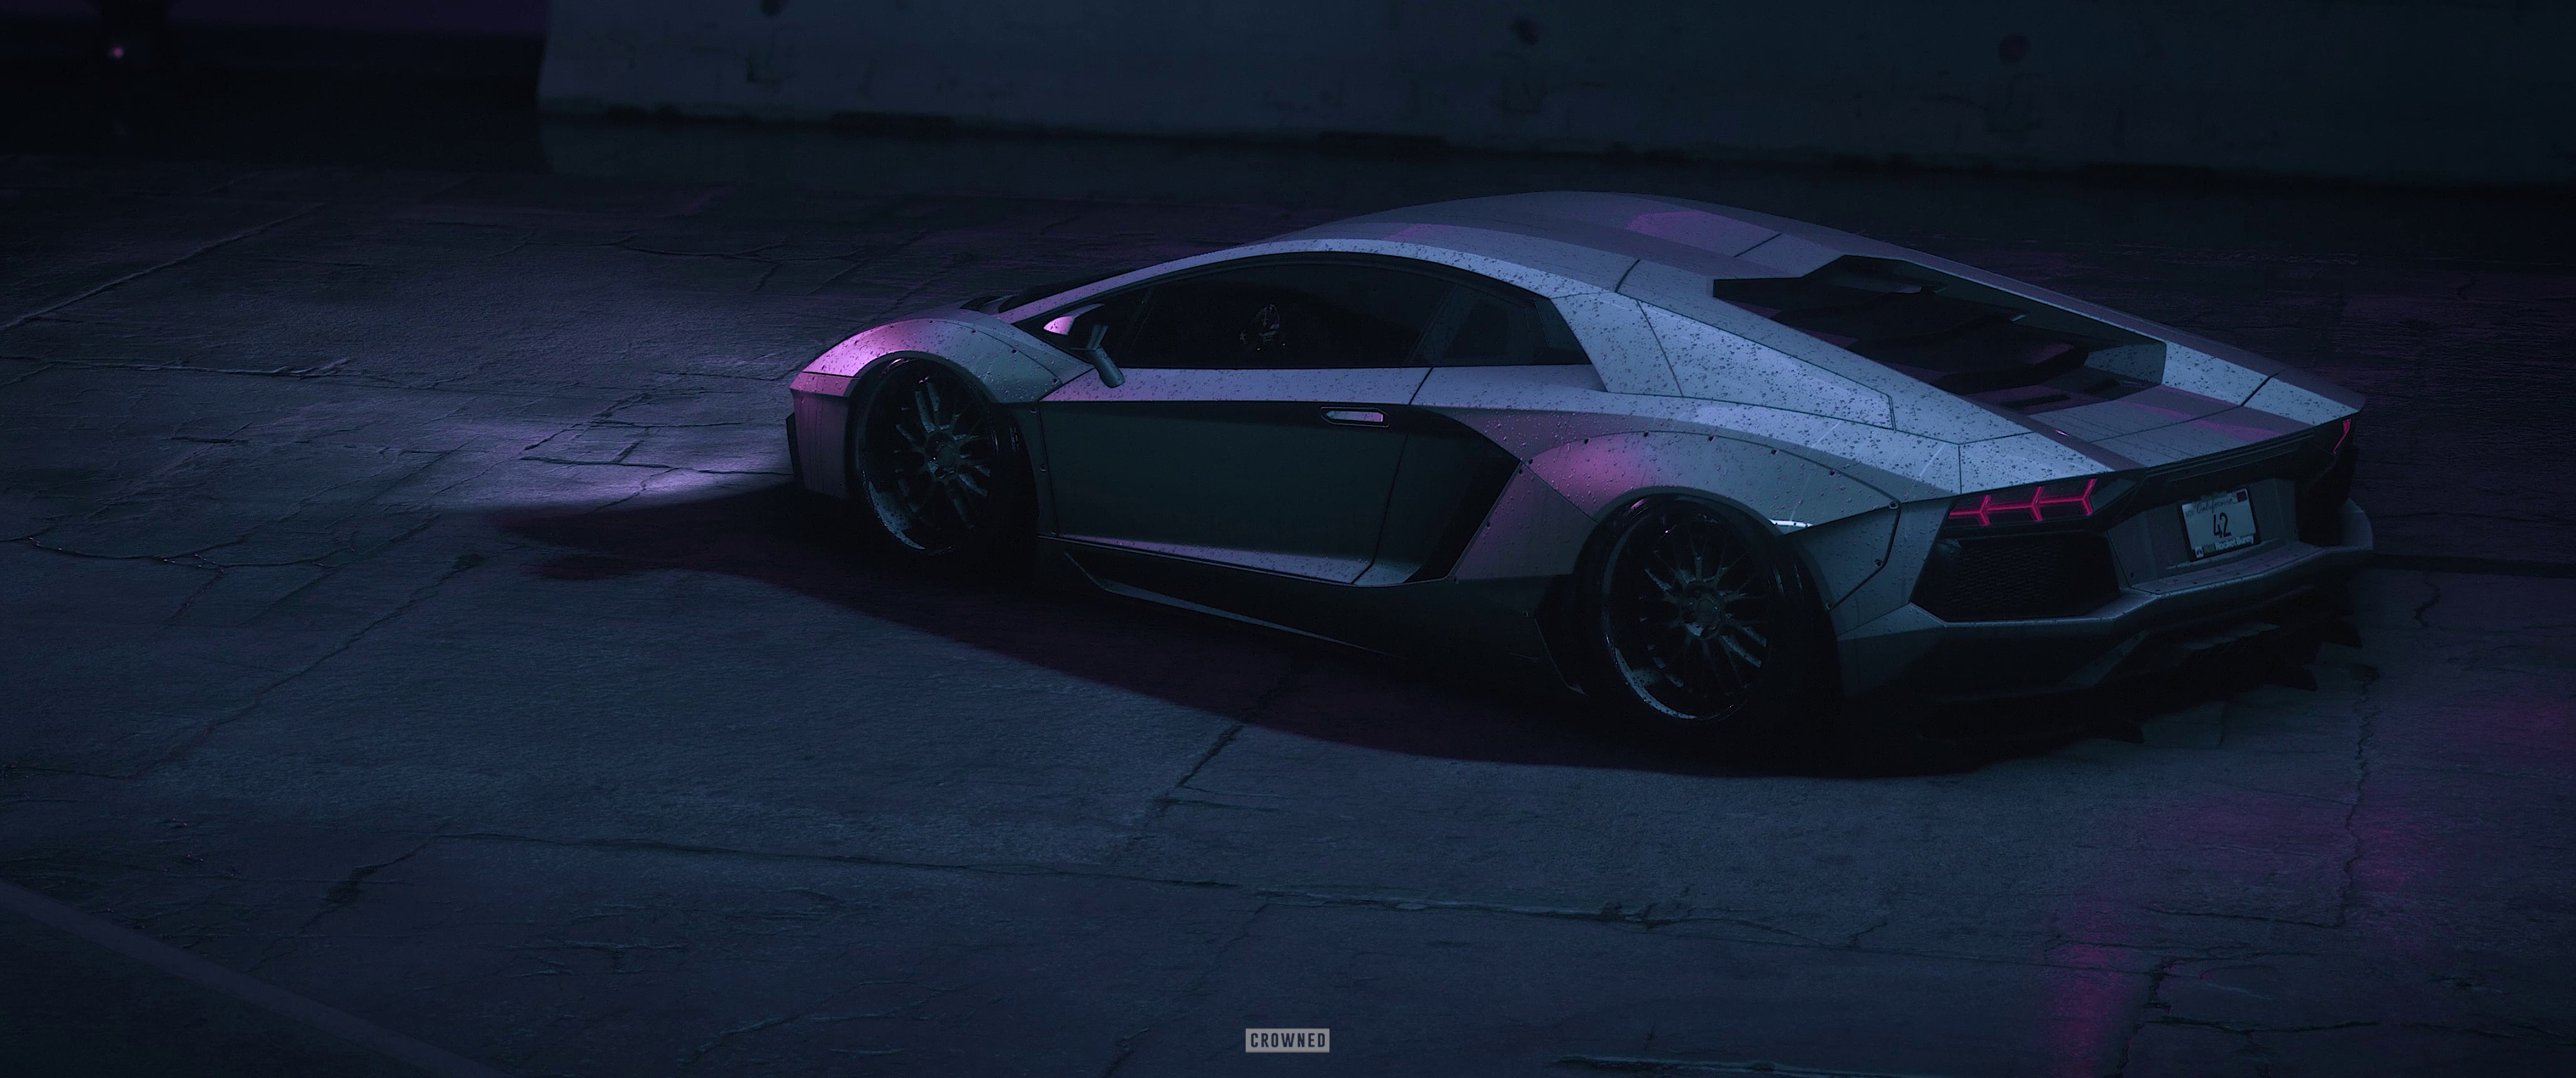 CROWNED, Need for Speed, Lamborghini Aventador, Vehicle Wallpaper